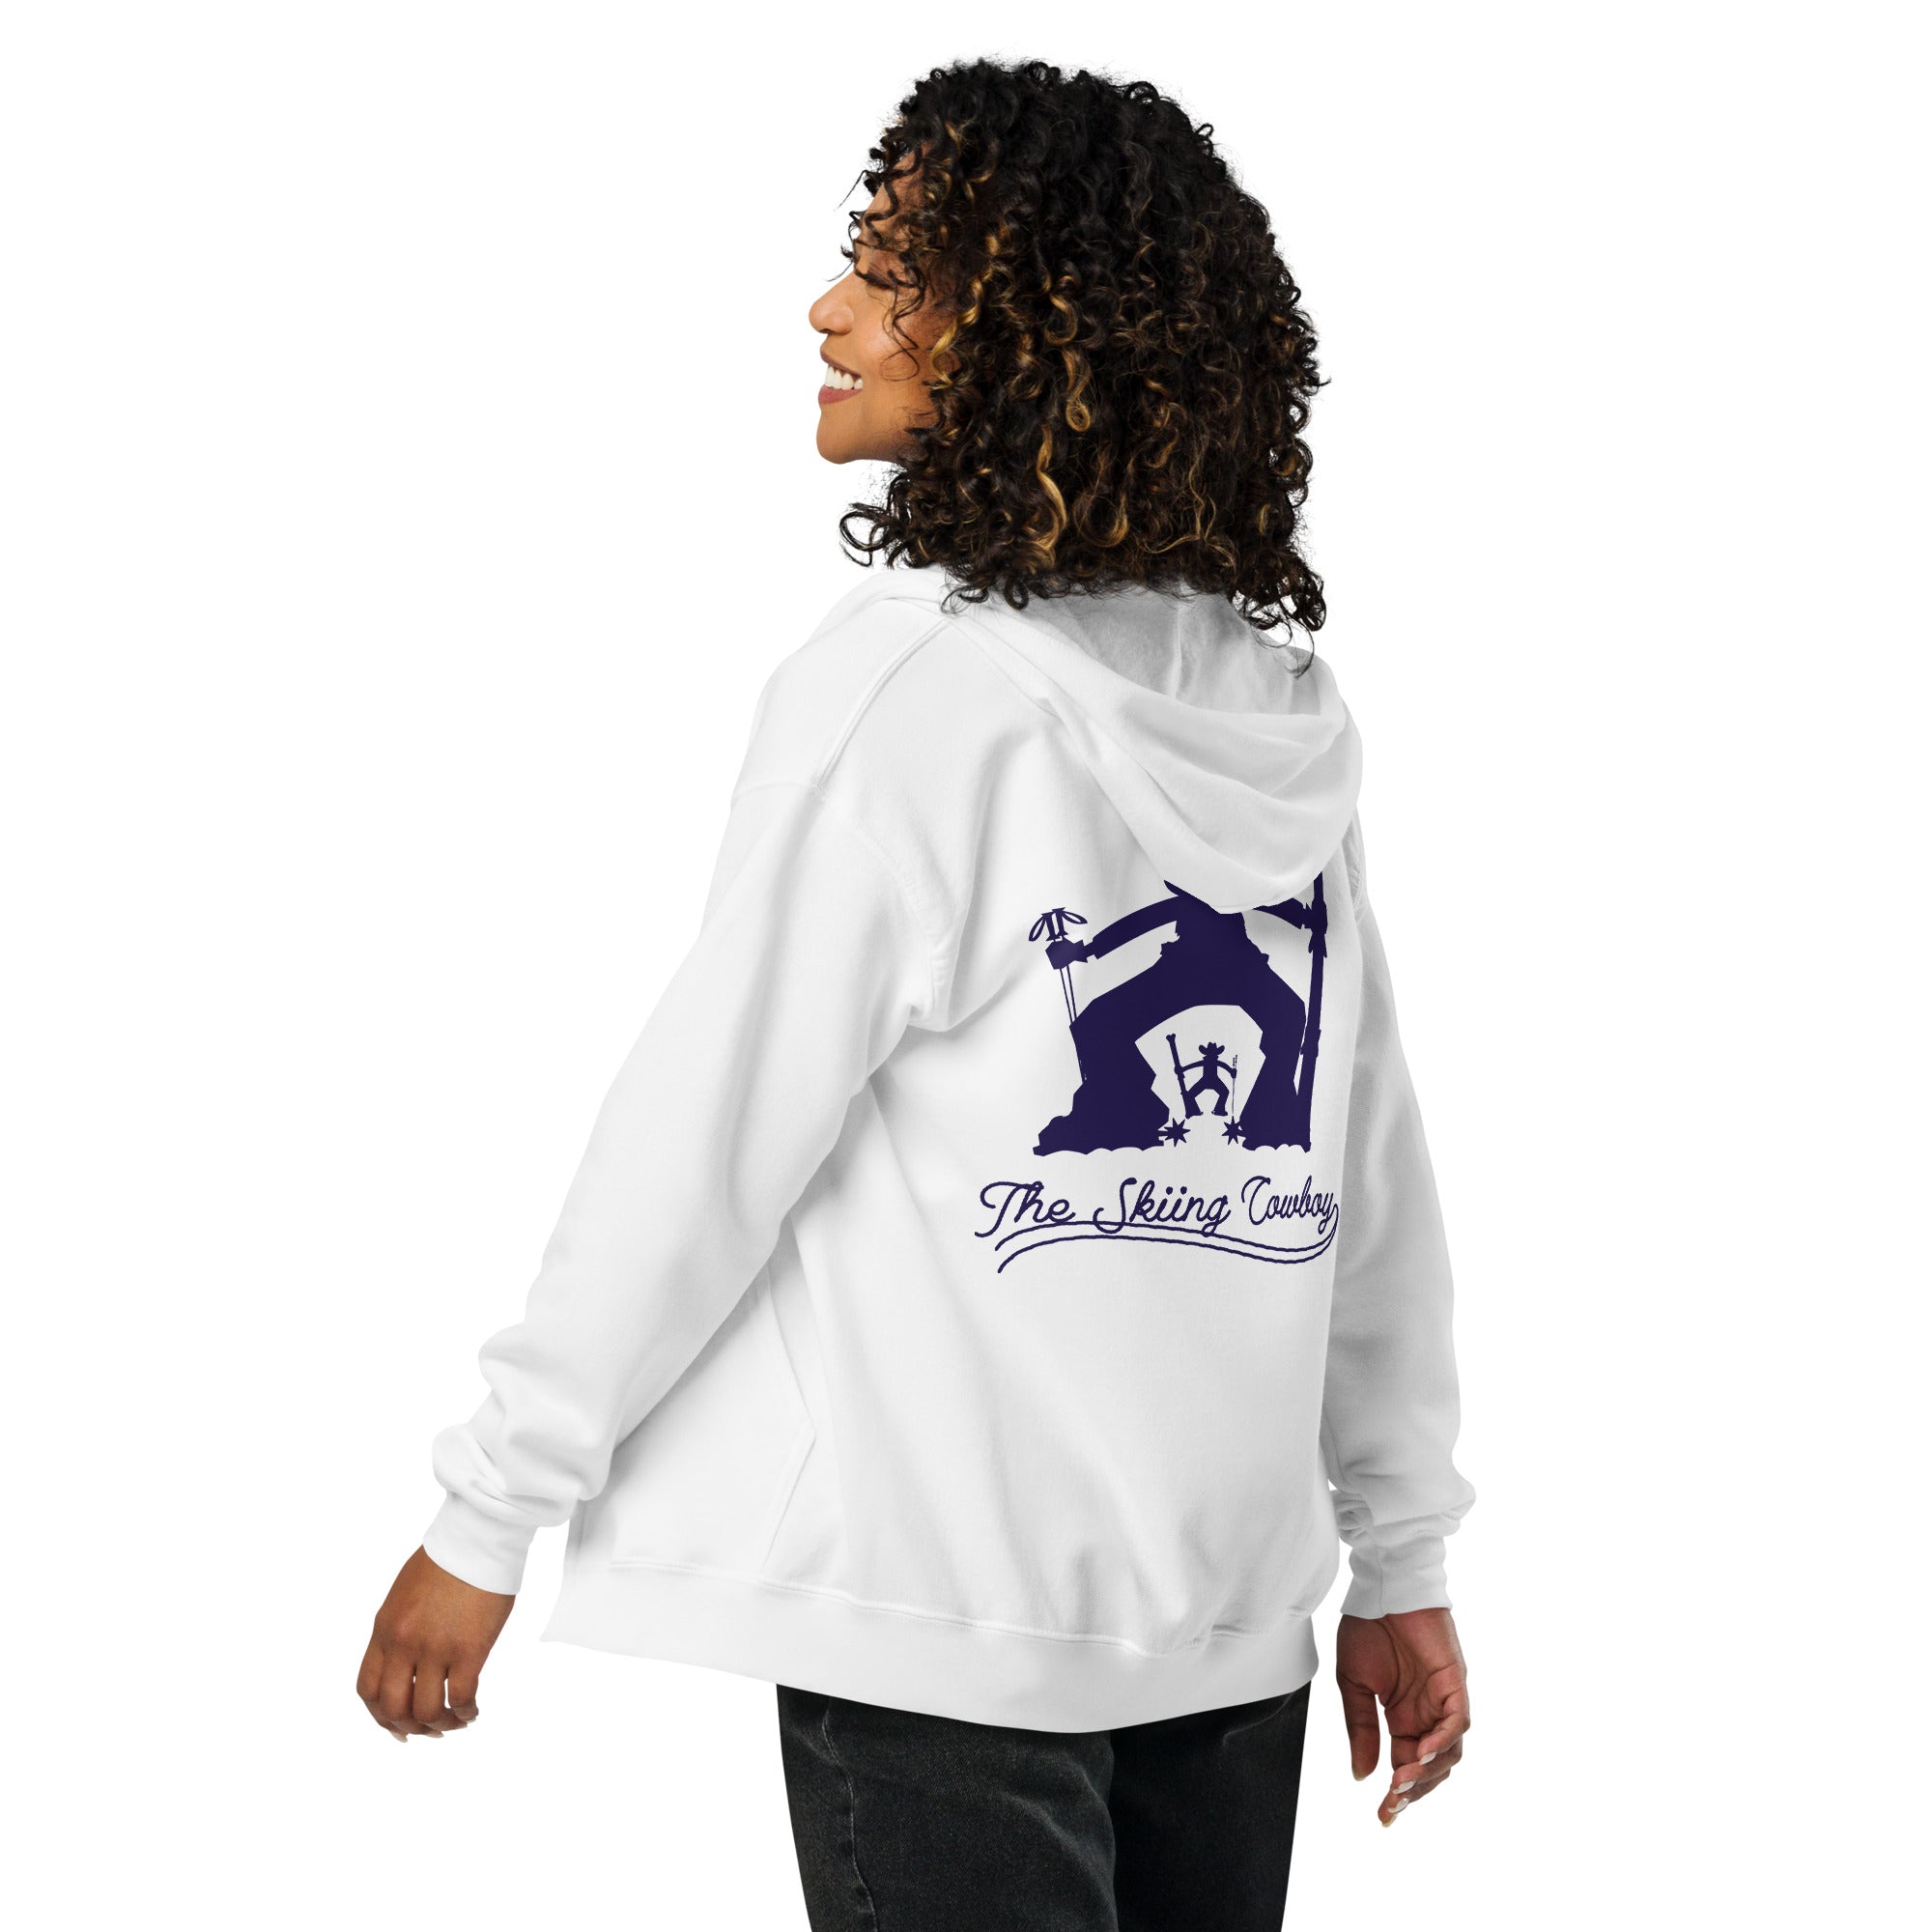 Unisex heavy blend zip hoodie The Skiing Cowboy Duel Silhouette (front & back)